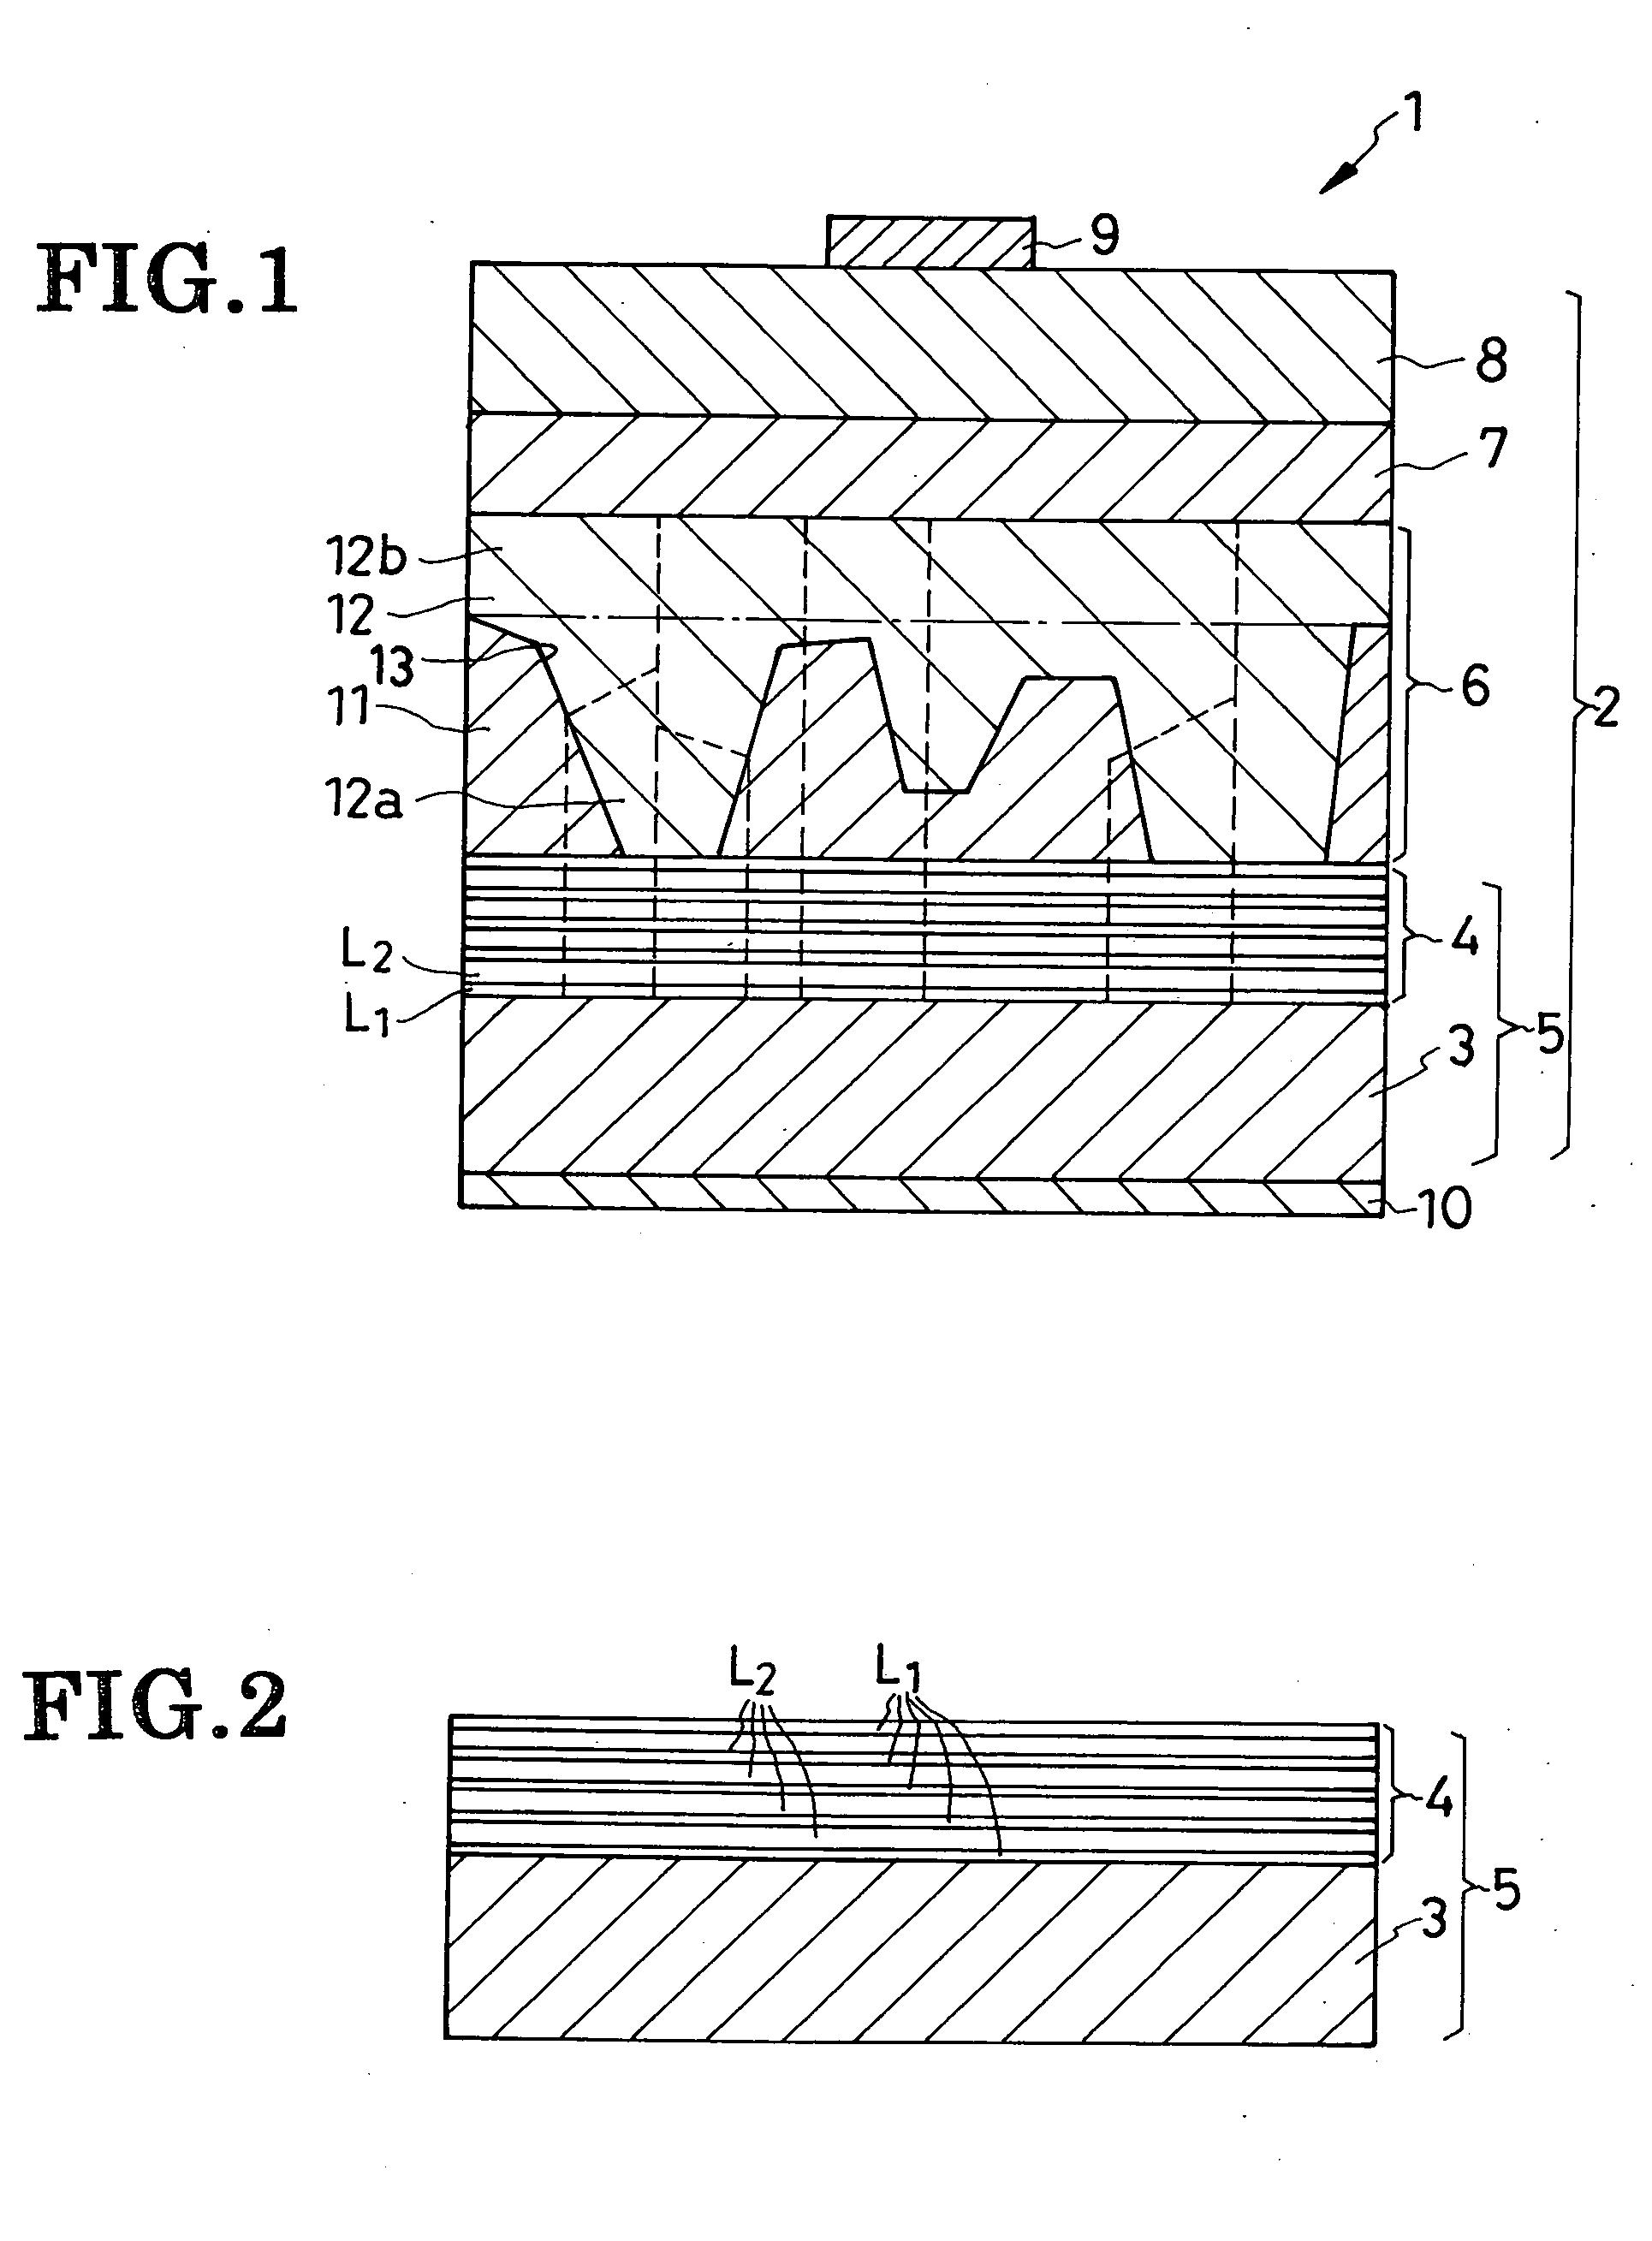 Method of making substrates for nitride semiconductor devices